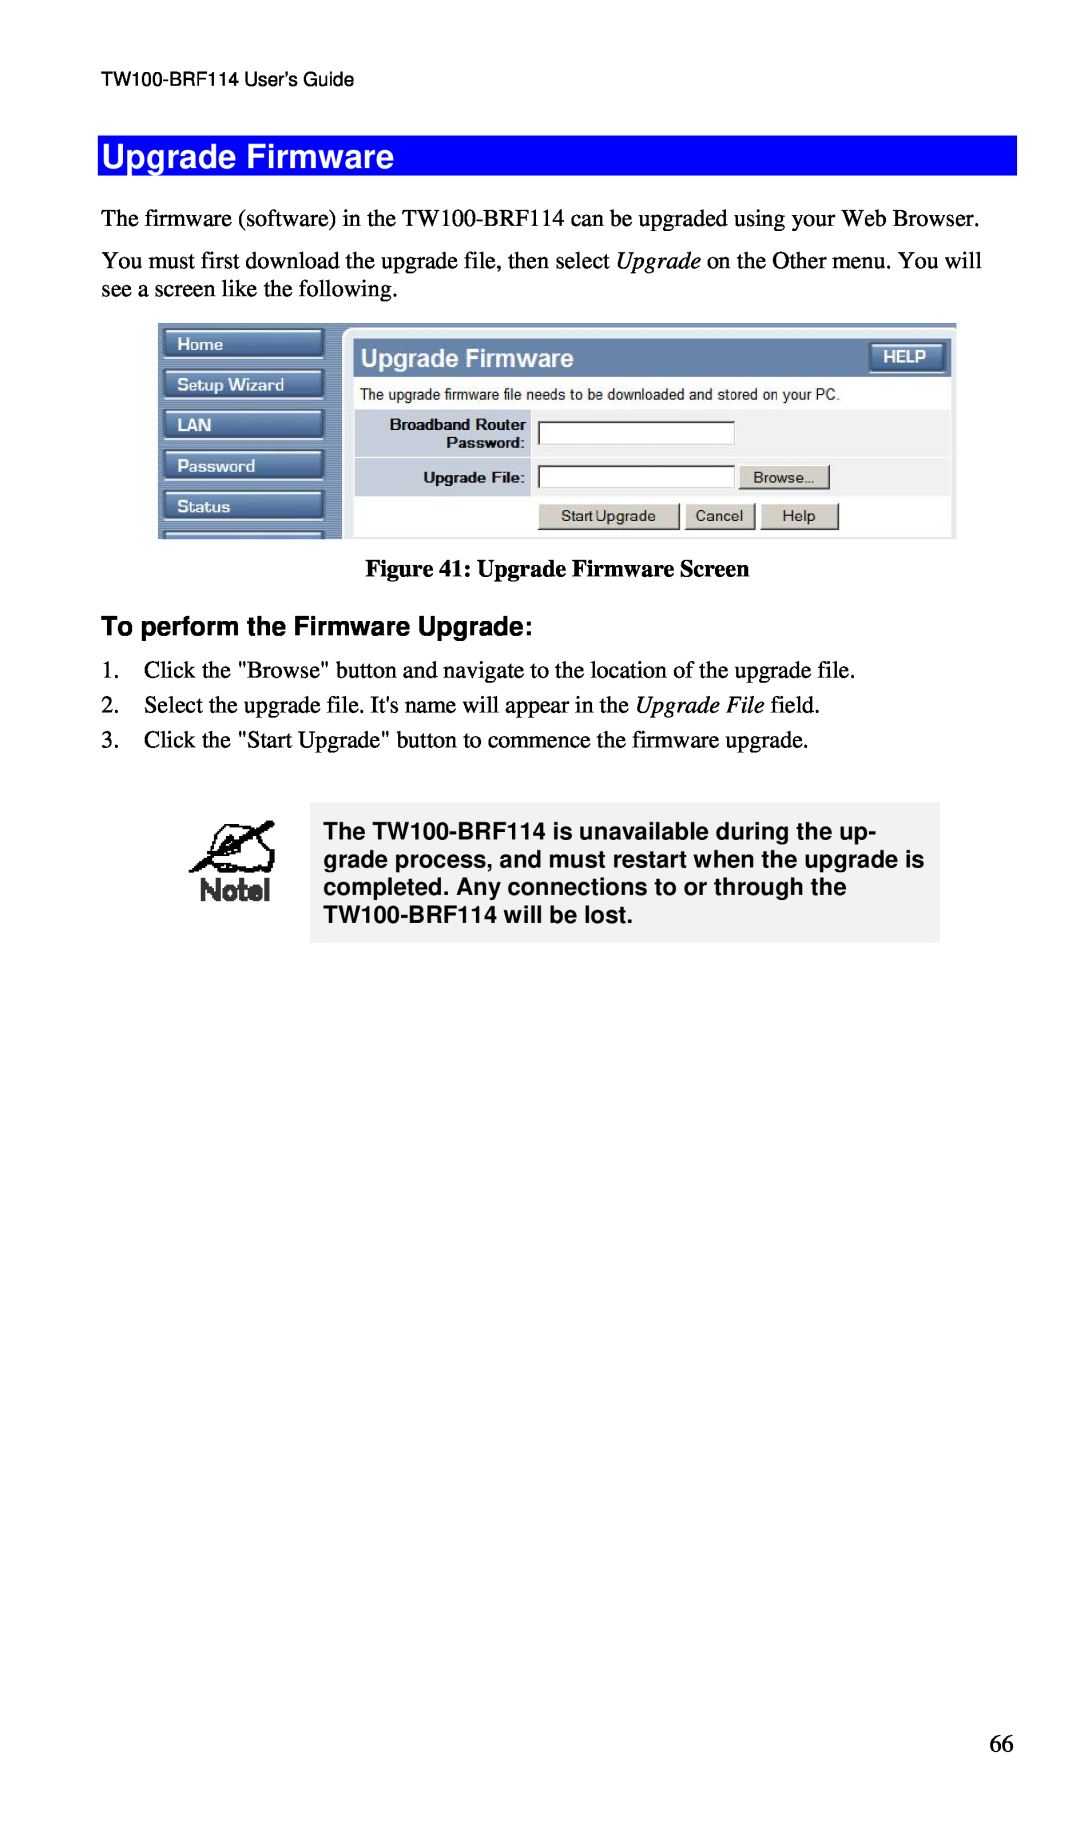 TRENDnet BRF114 manual To perform the Firmware Upgrade, Upgrade Firmware Screen 